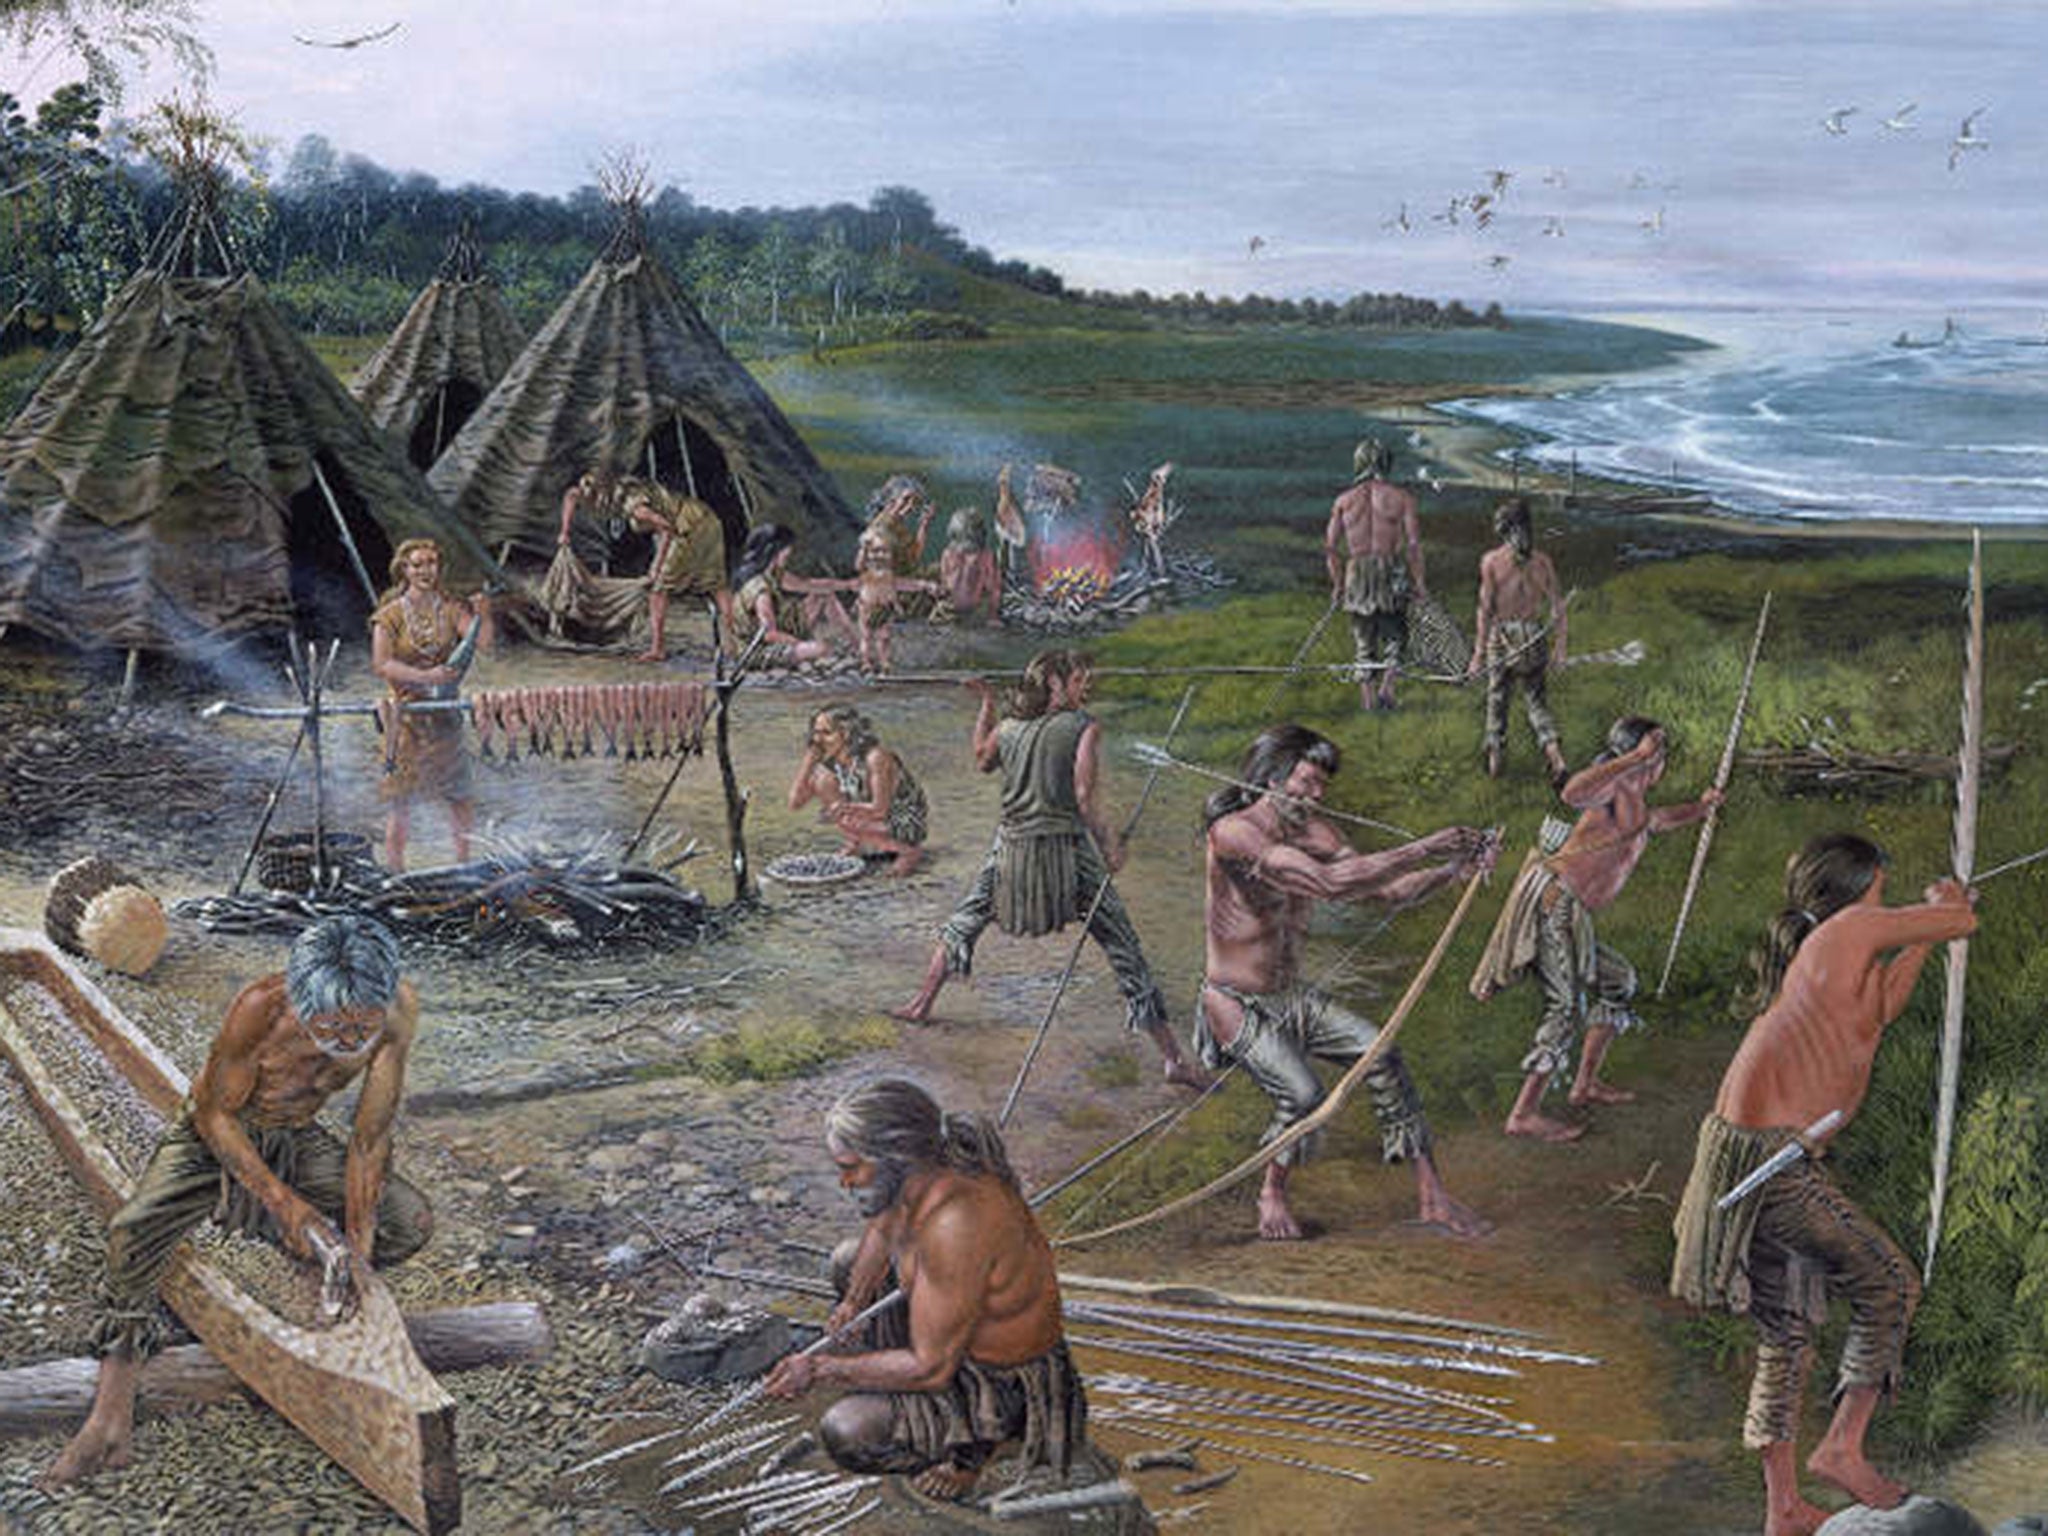 An artist’s impression of tribes fishing during the Mesolithic period. The new study aims to reveal the culture and lifestyle of prehistoric humans